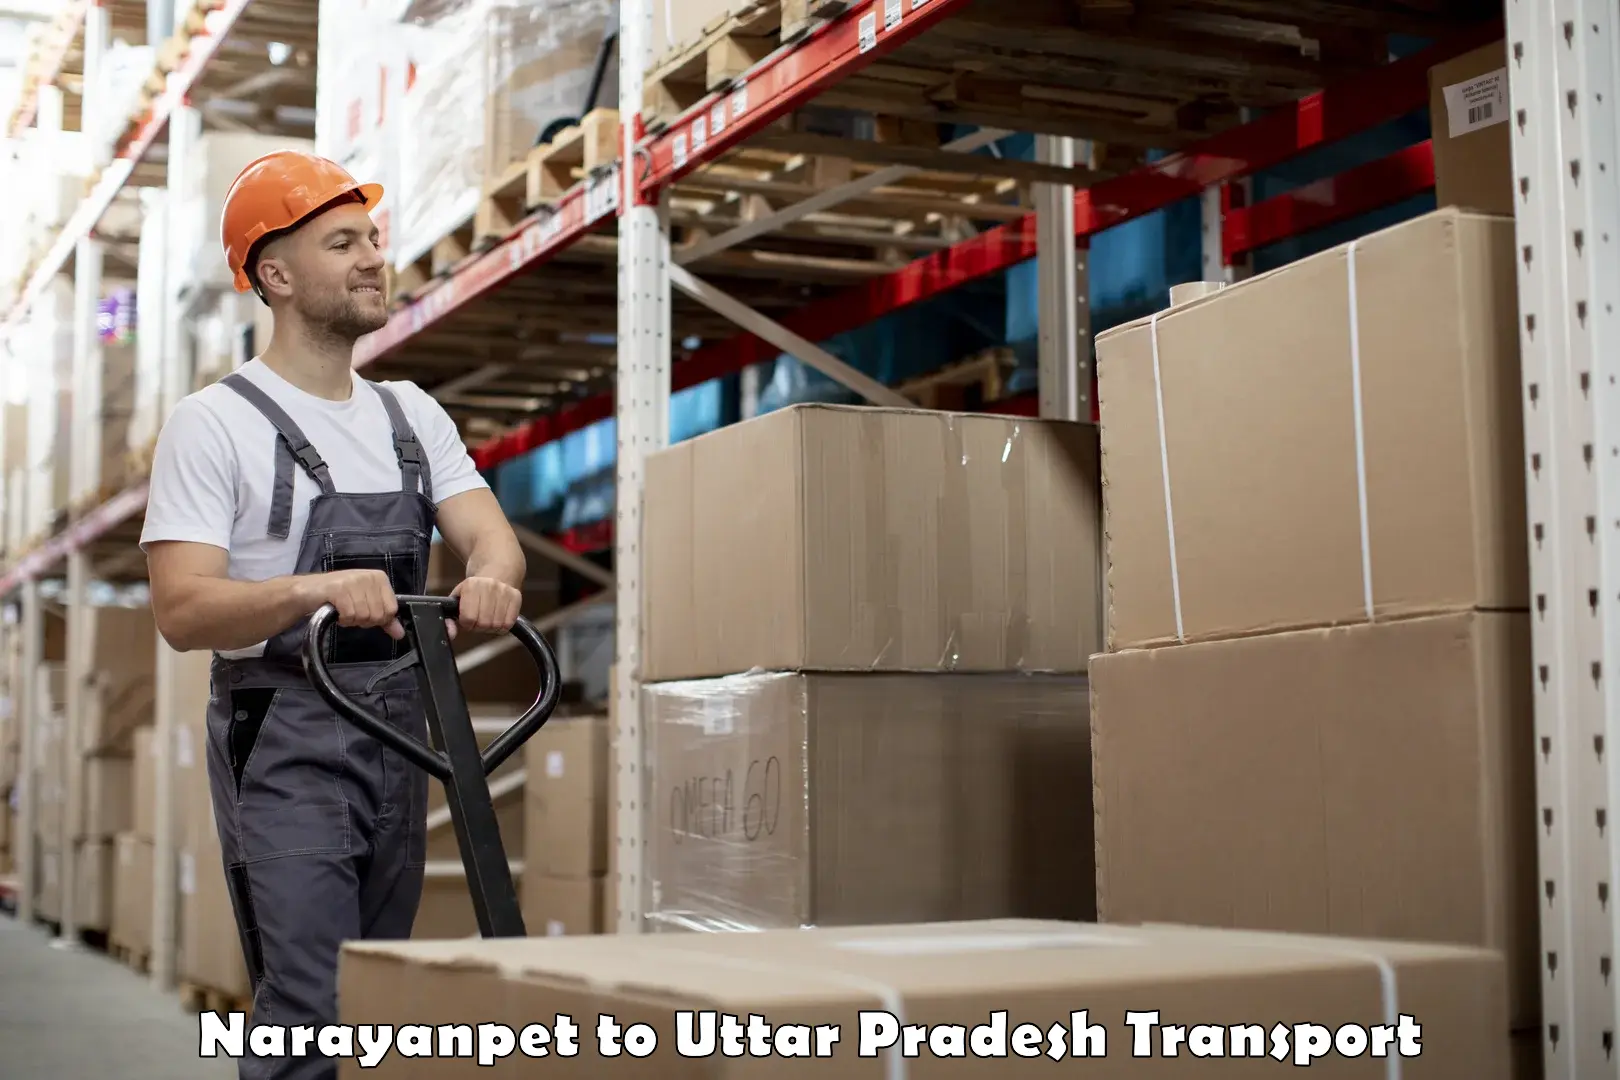 Truck transport companies in India Narayanpet to Sultanpur